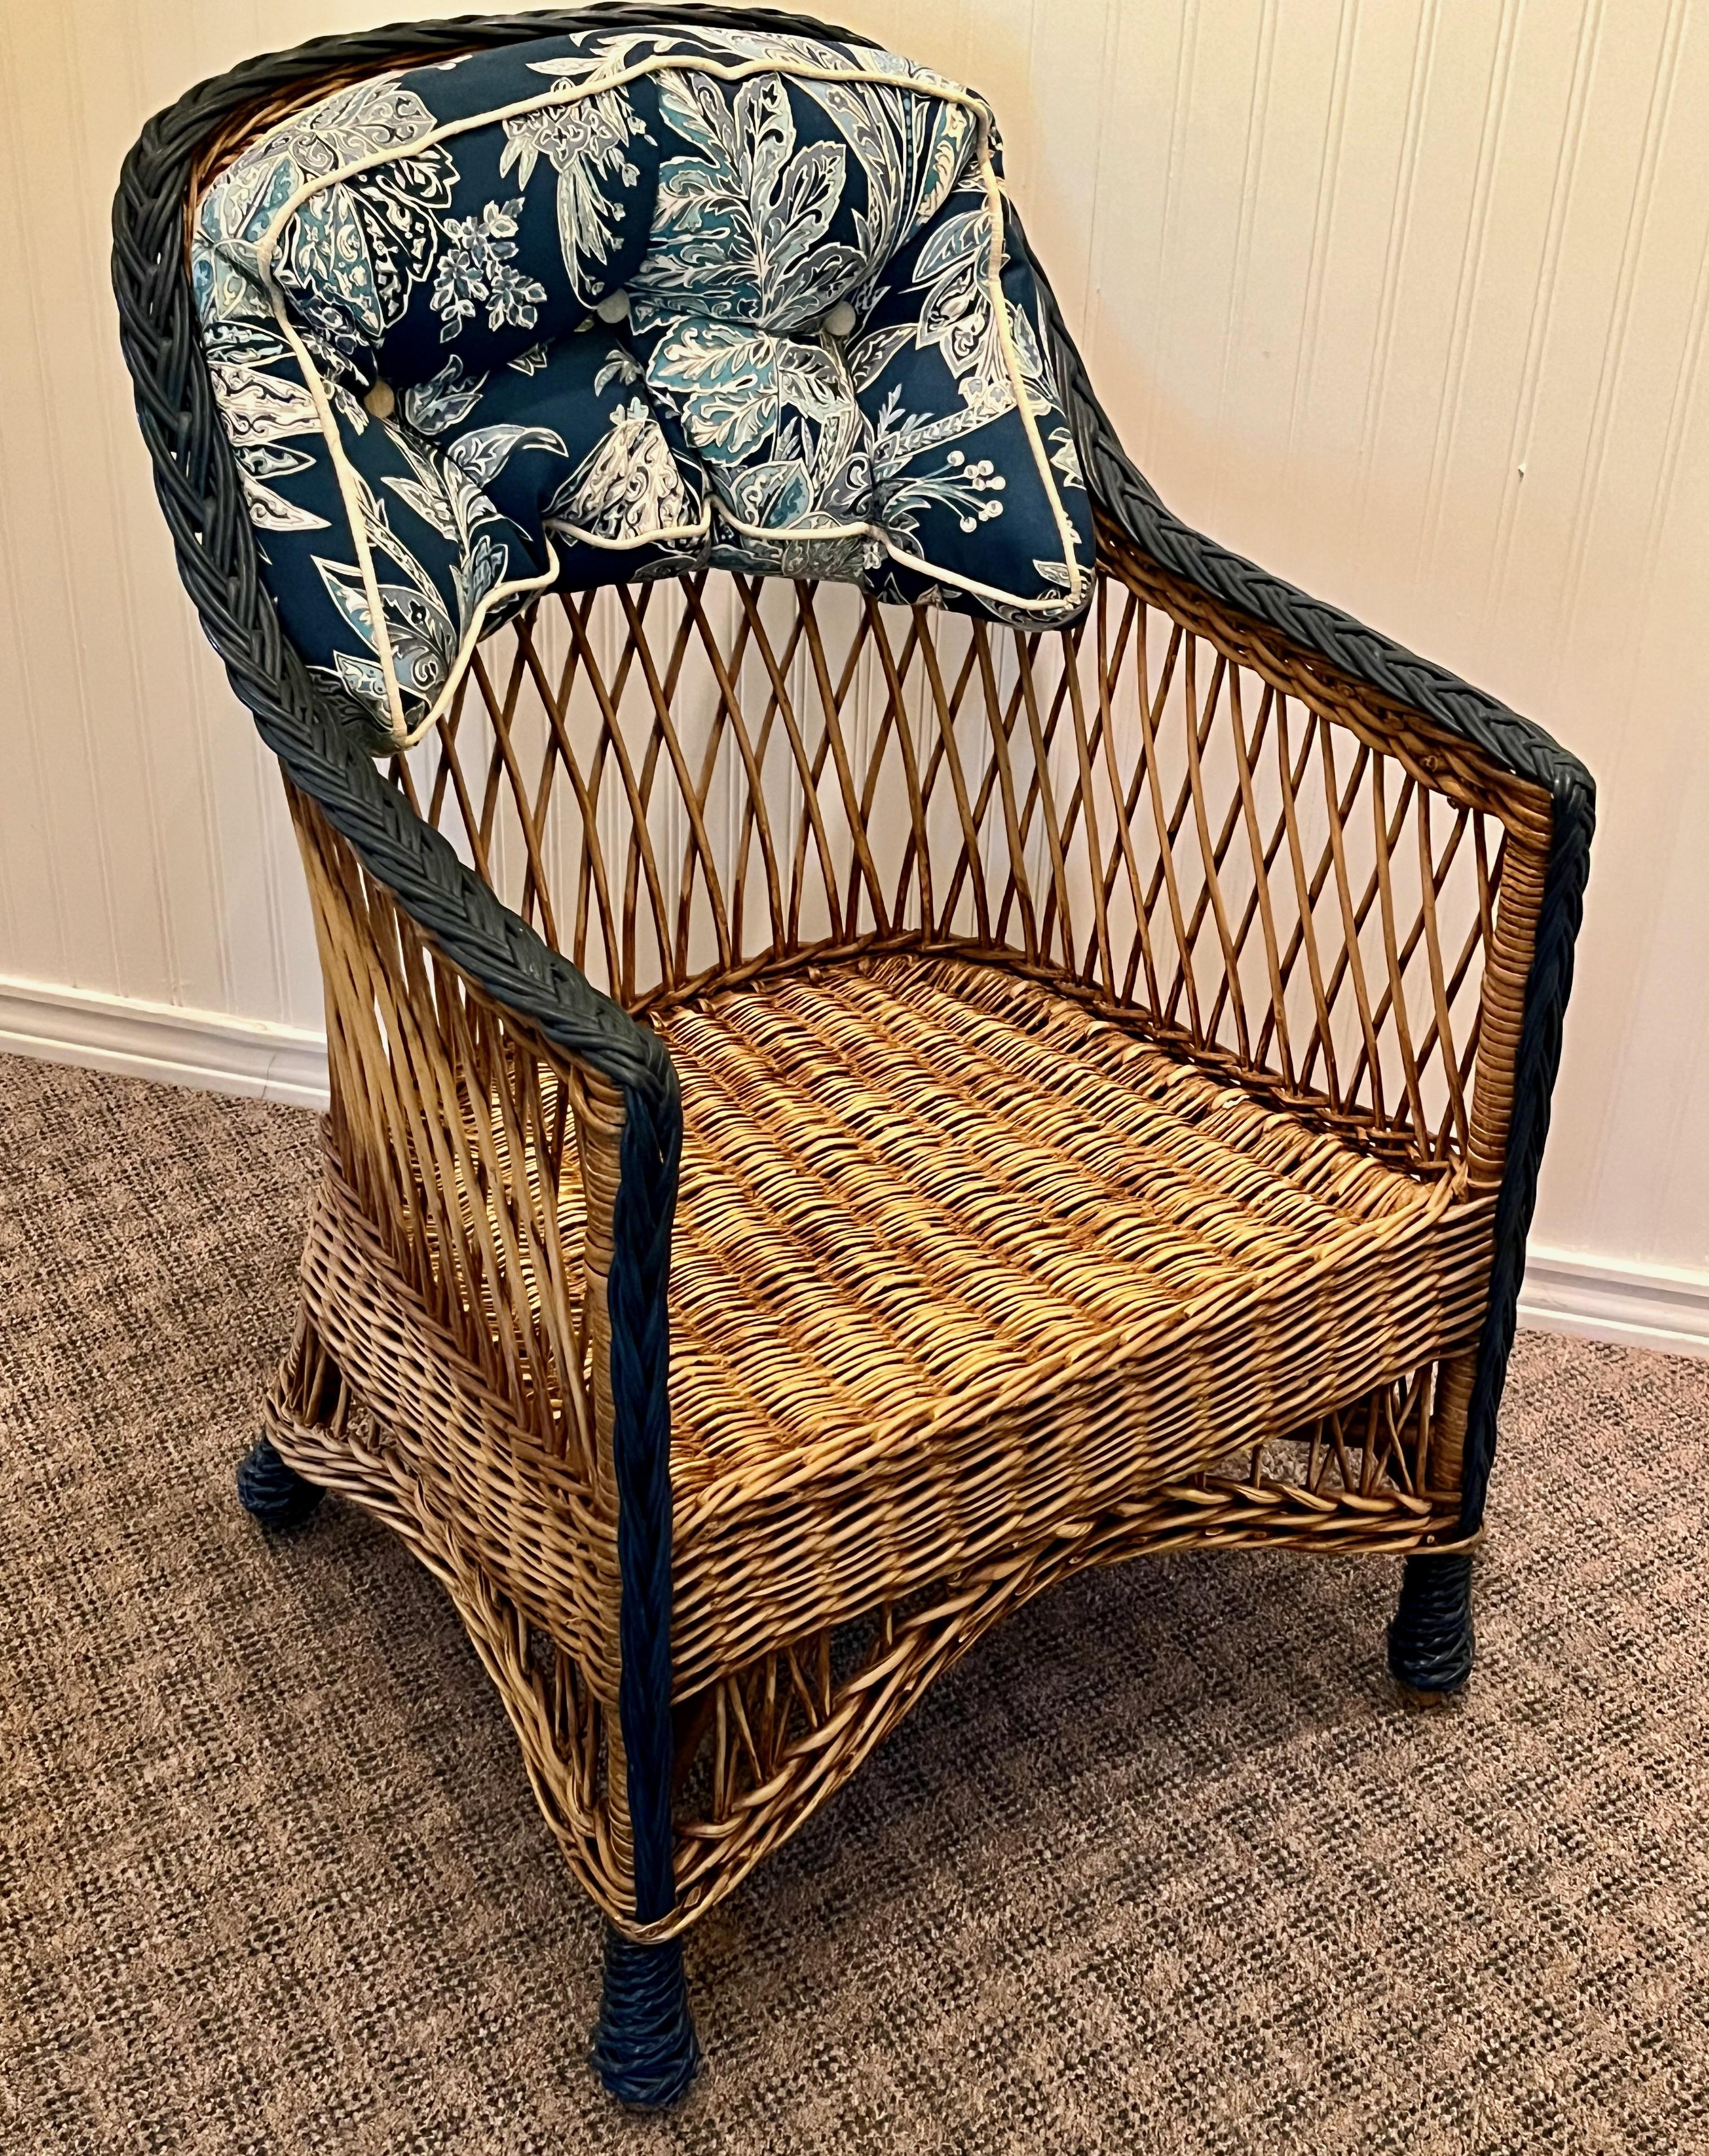 Upholstery An Antique Hand Woven Natural Finish Bar Harbor Style Arm Chair With Blue Trim For Sale